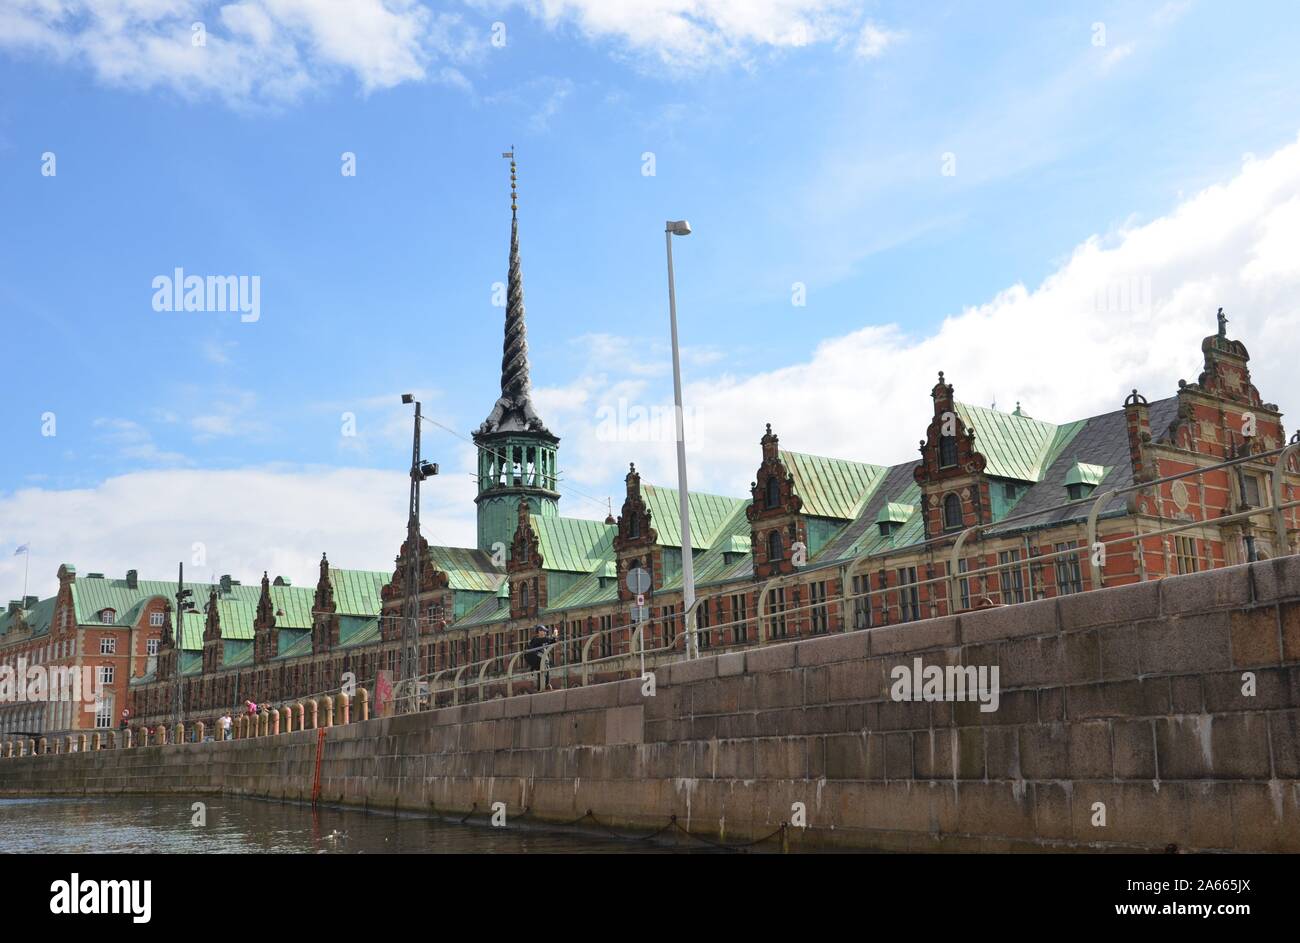 Spire High Resolution Stock Photography and Images - Alamy